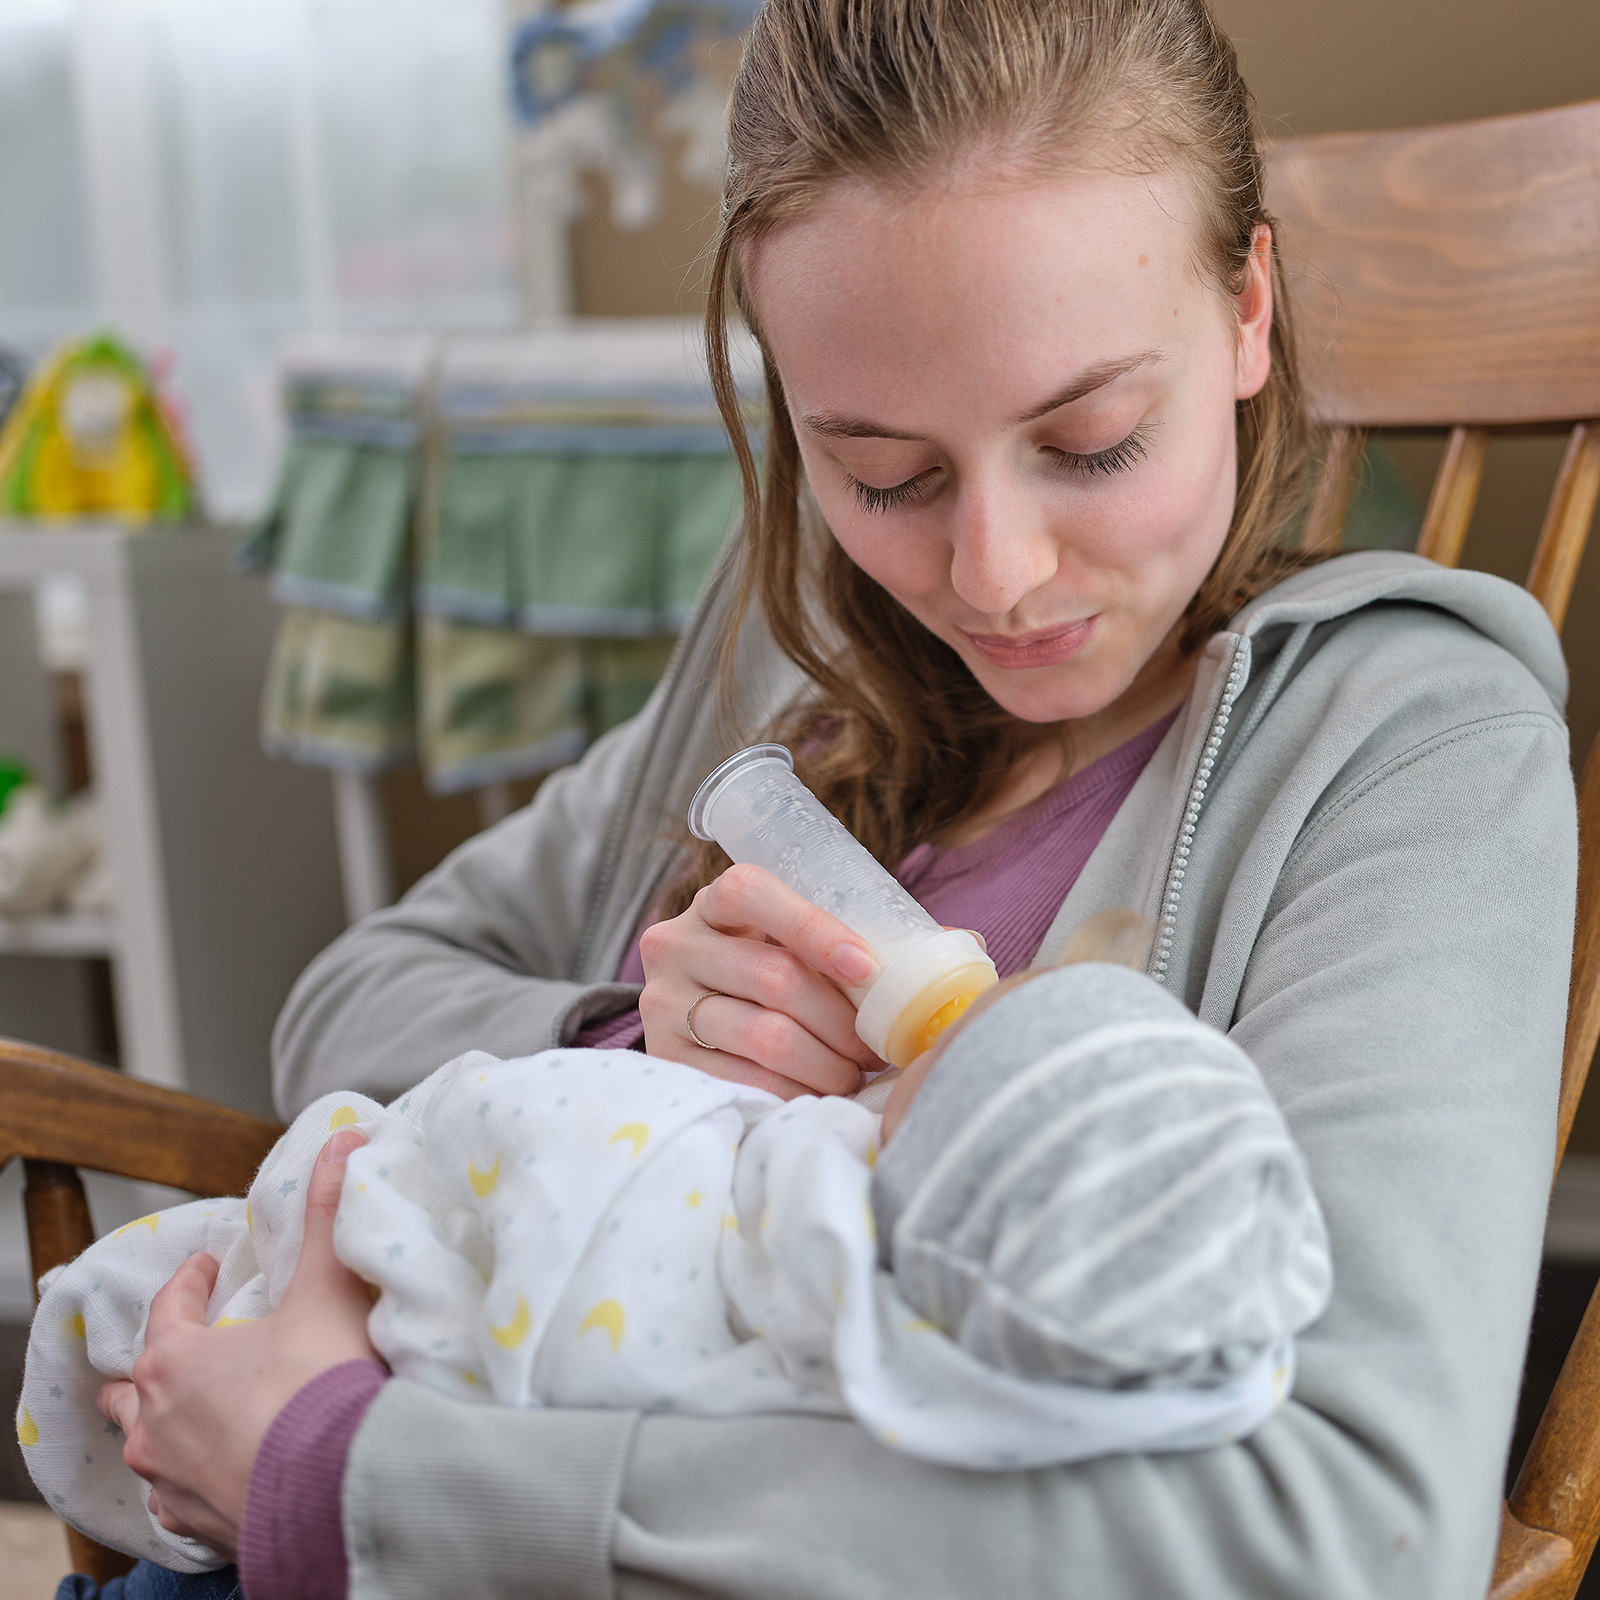 Medicaid member and new mom feeds her baby by bottle